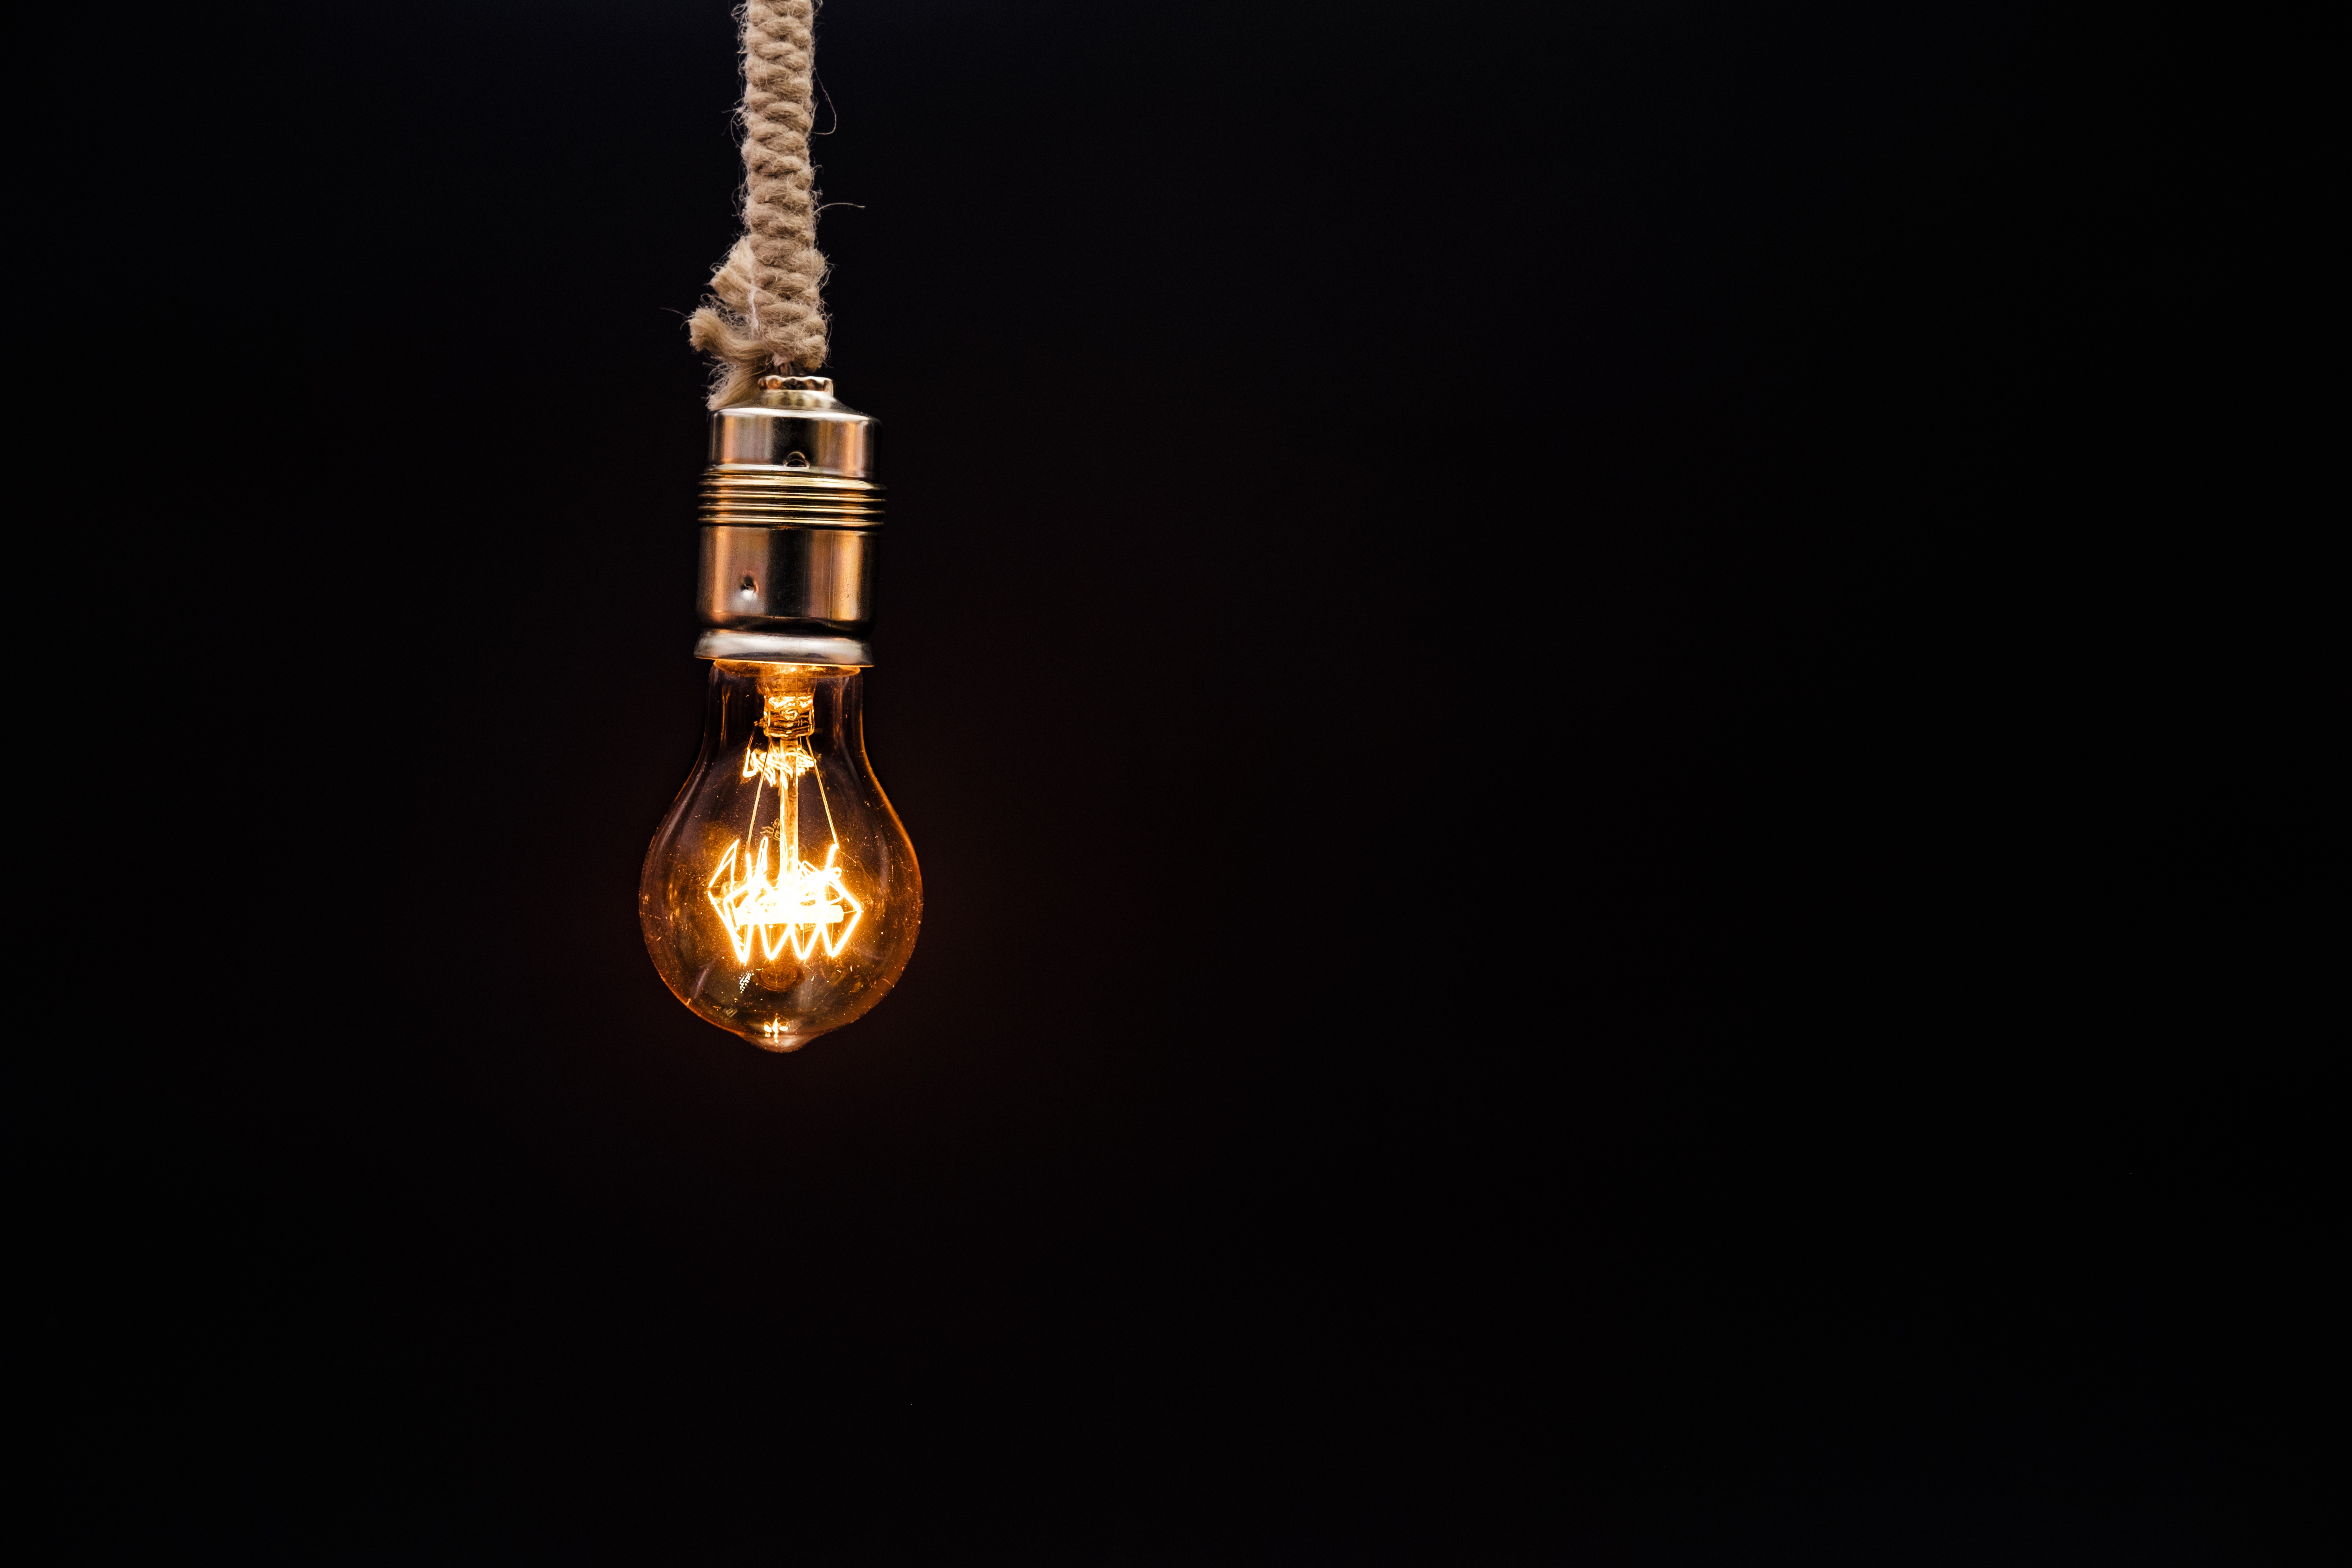 141605 download wallpaper minimalism, illumination, lighting, light bulb, electricity, rope, edison lamp, lamochka screensavers and pictures for free